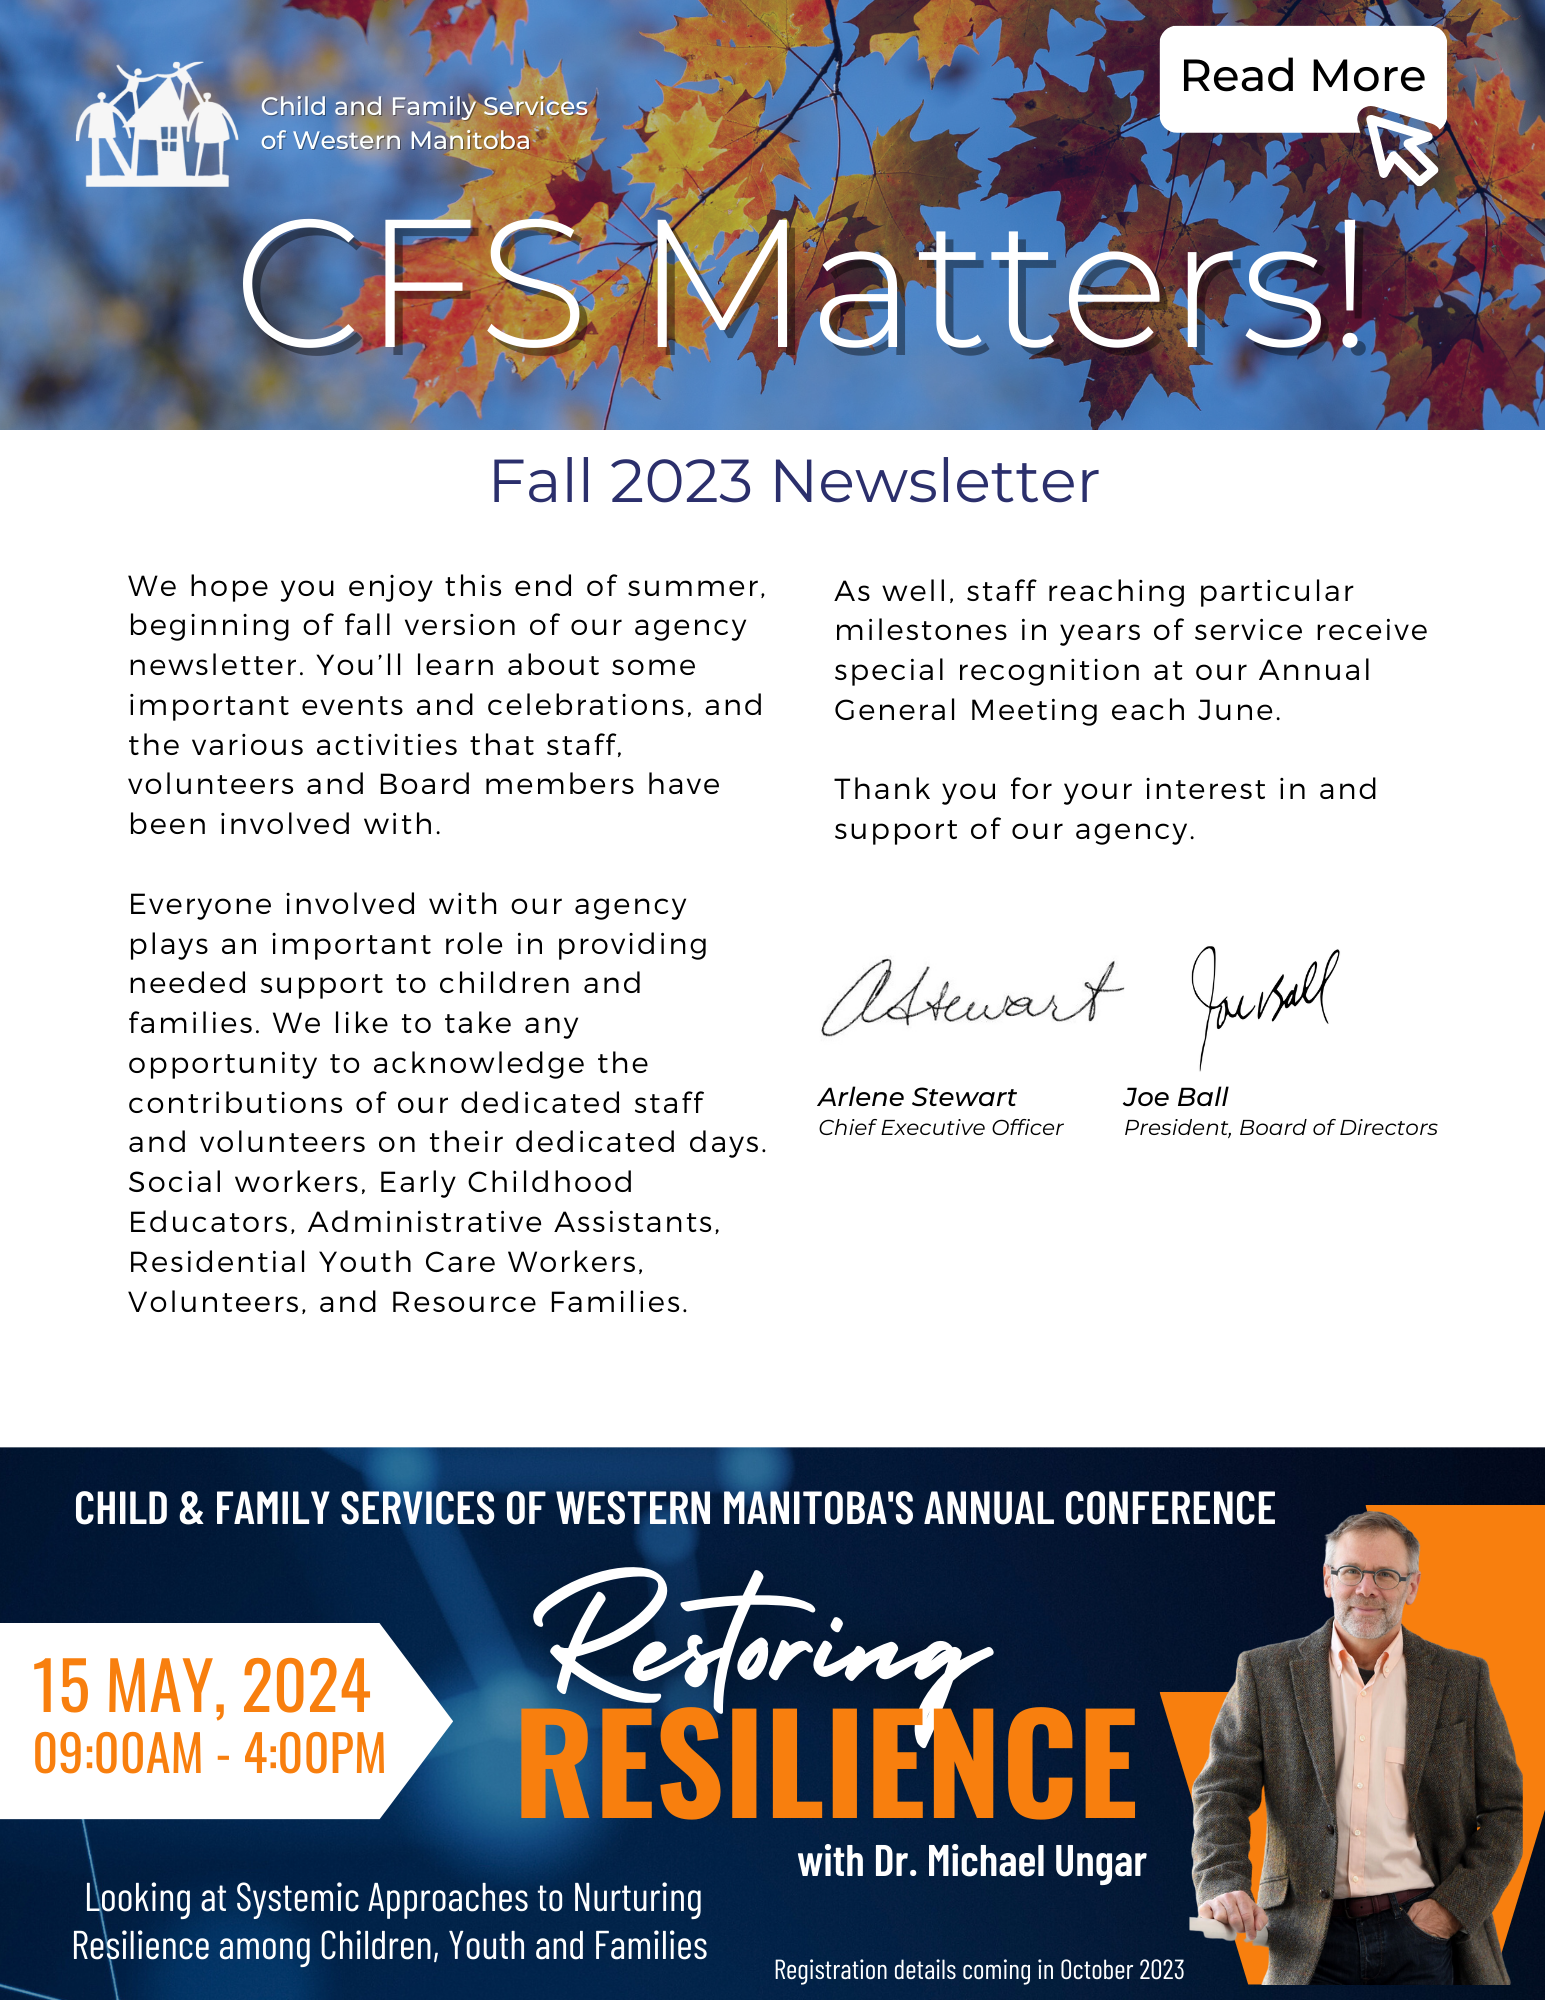 Newsletter cover with welcome message and advert for upcoming spring 2024 annual conference on restoring resilience.